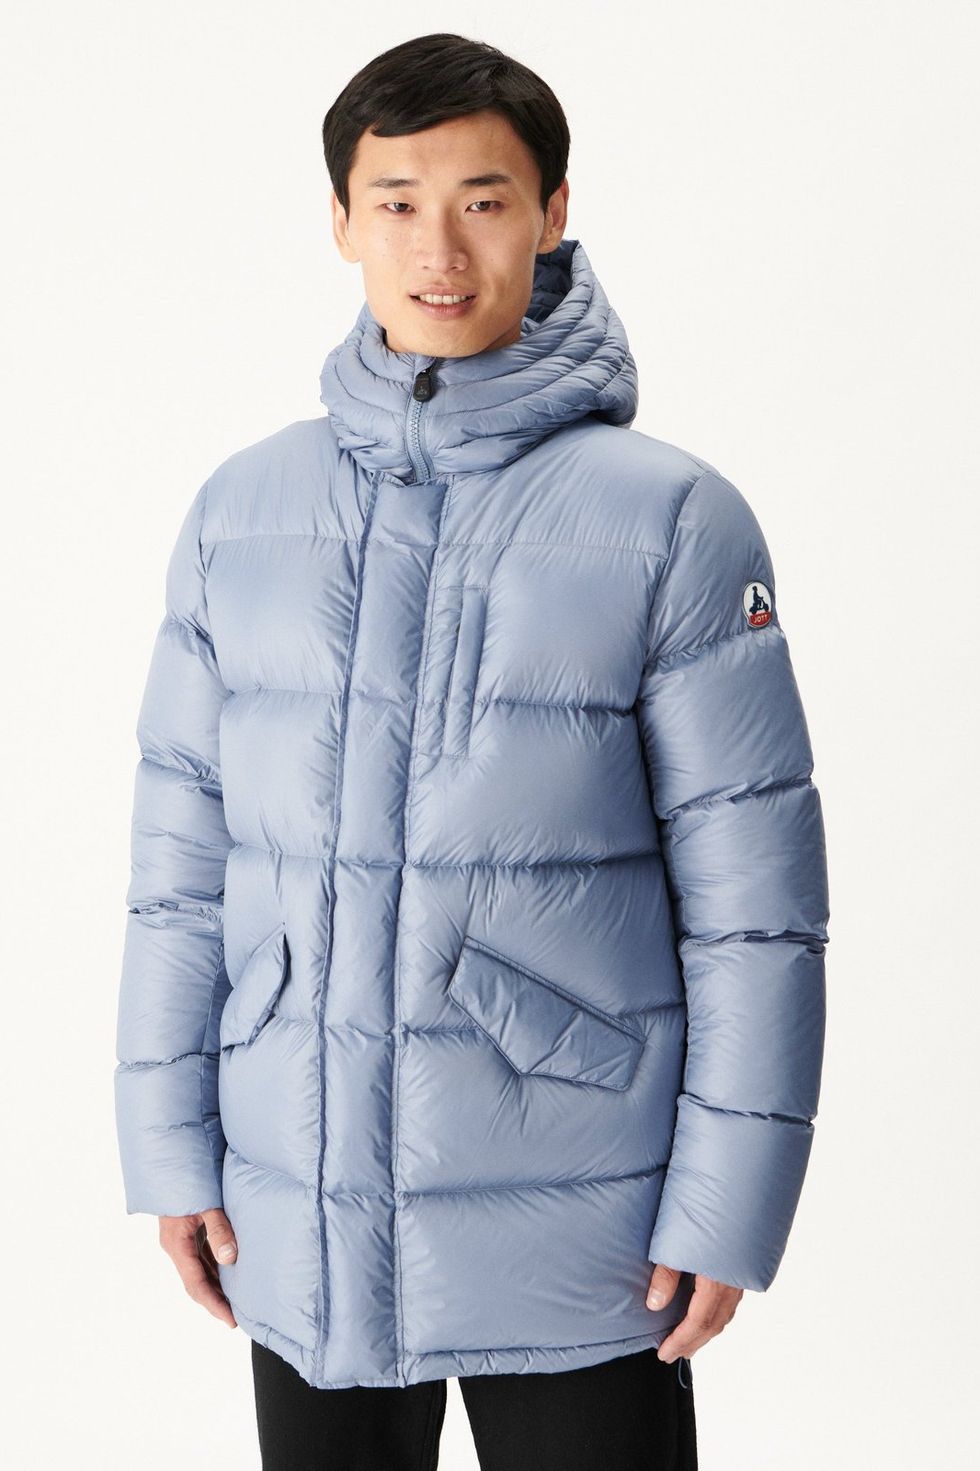 Washed Blue Warm hooded down jacket